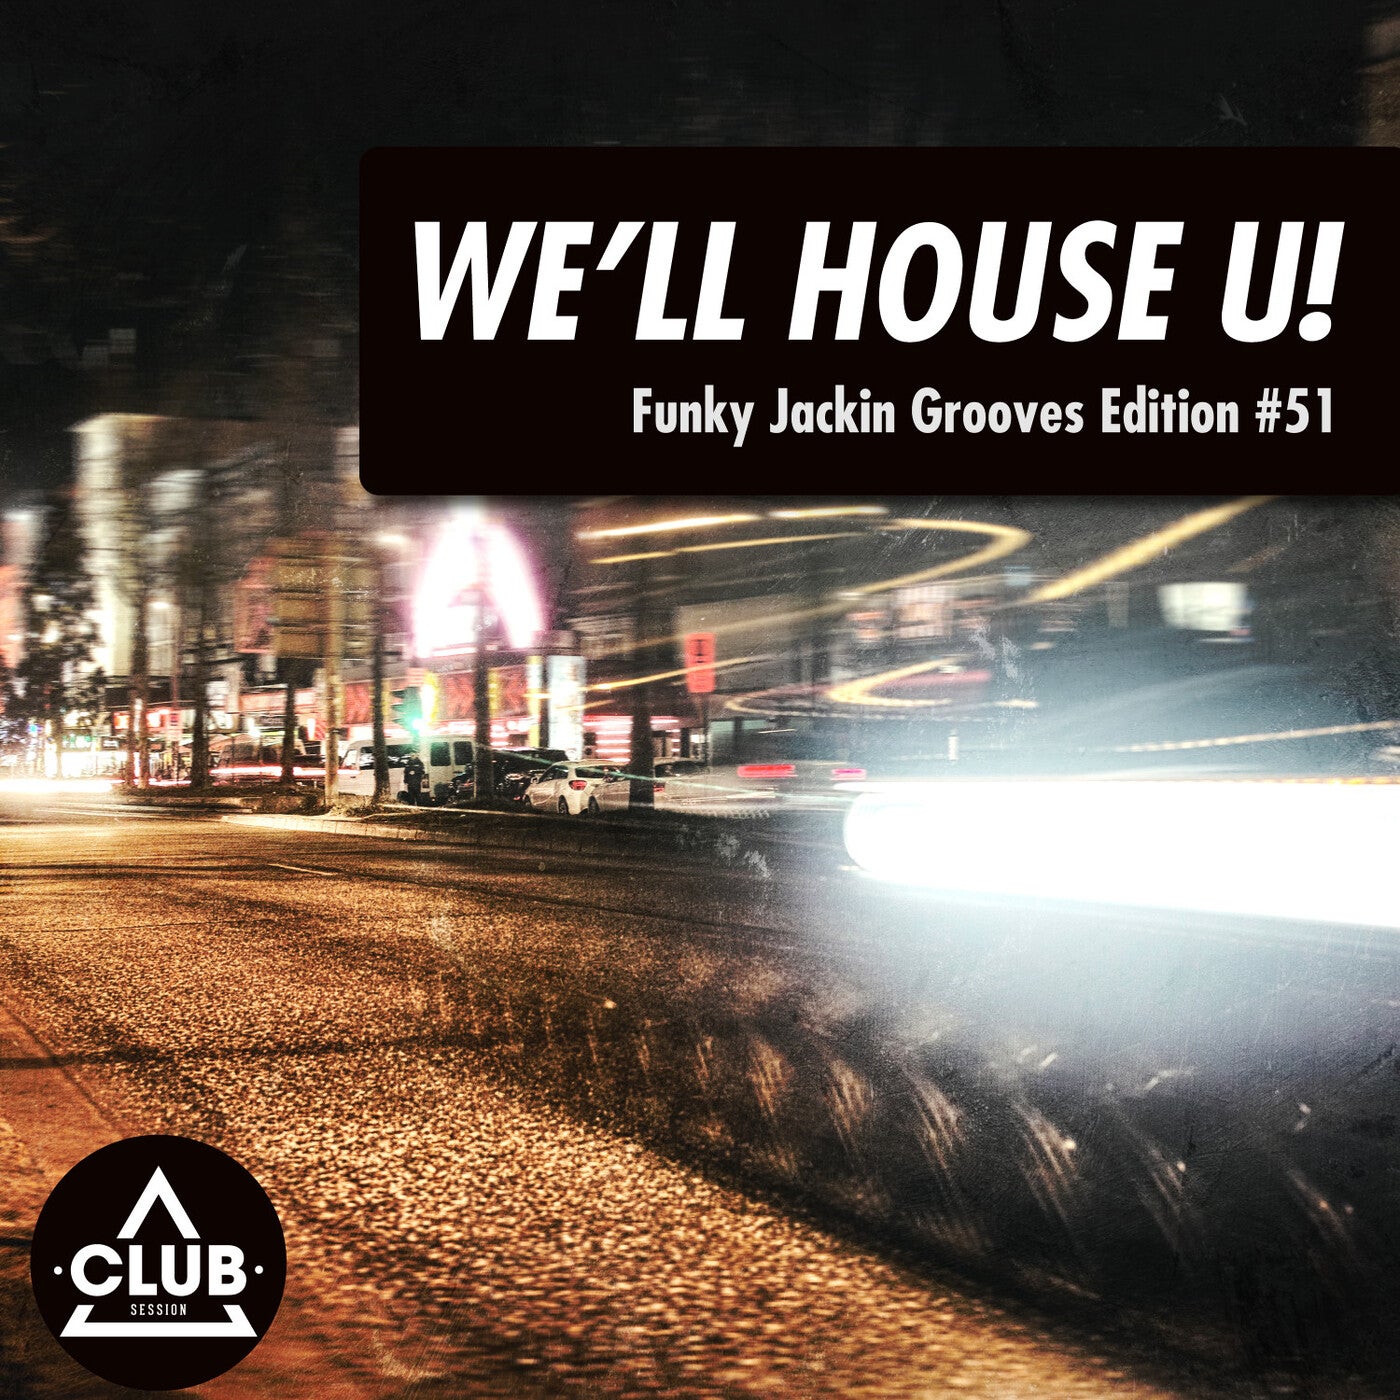 We'll House U! - Funky Jackin' Grooves Edition Vol. 51